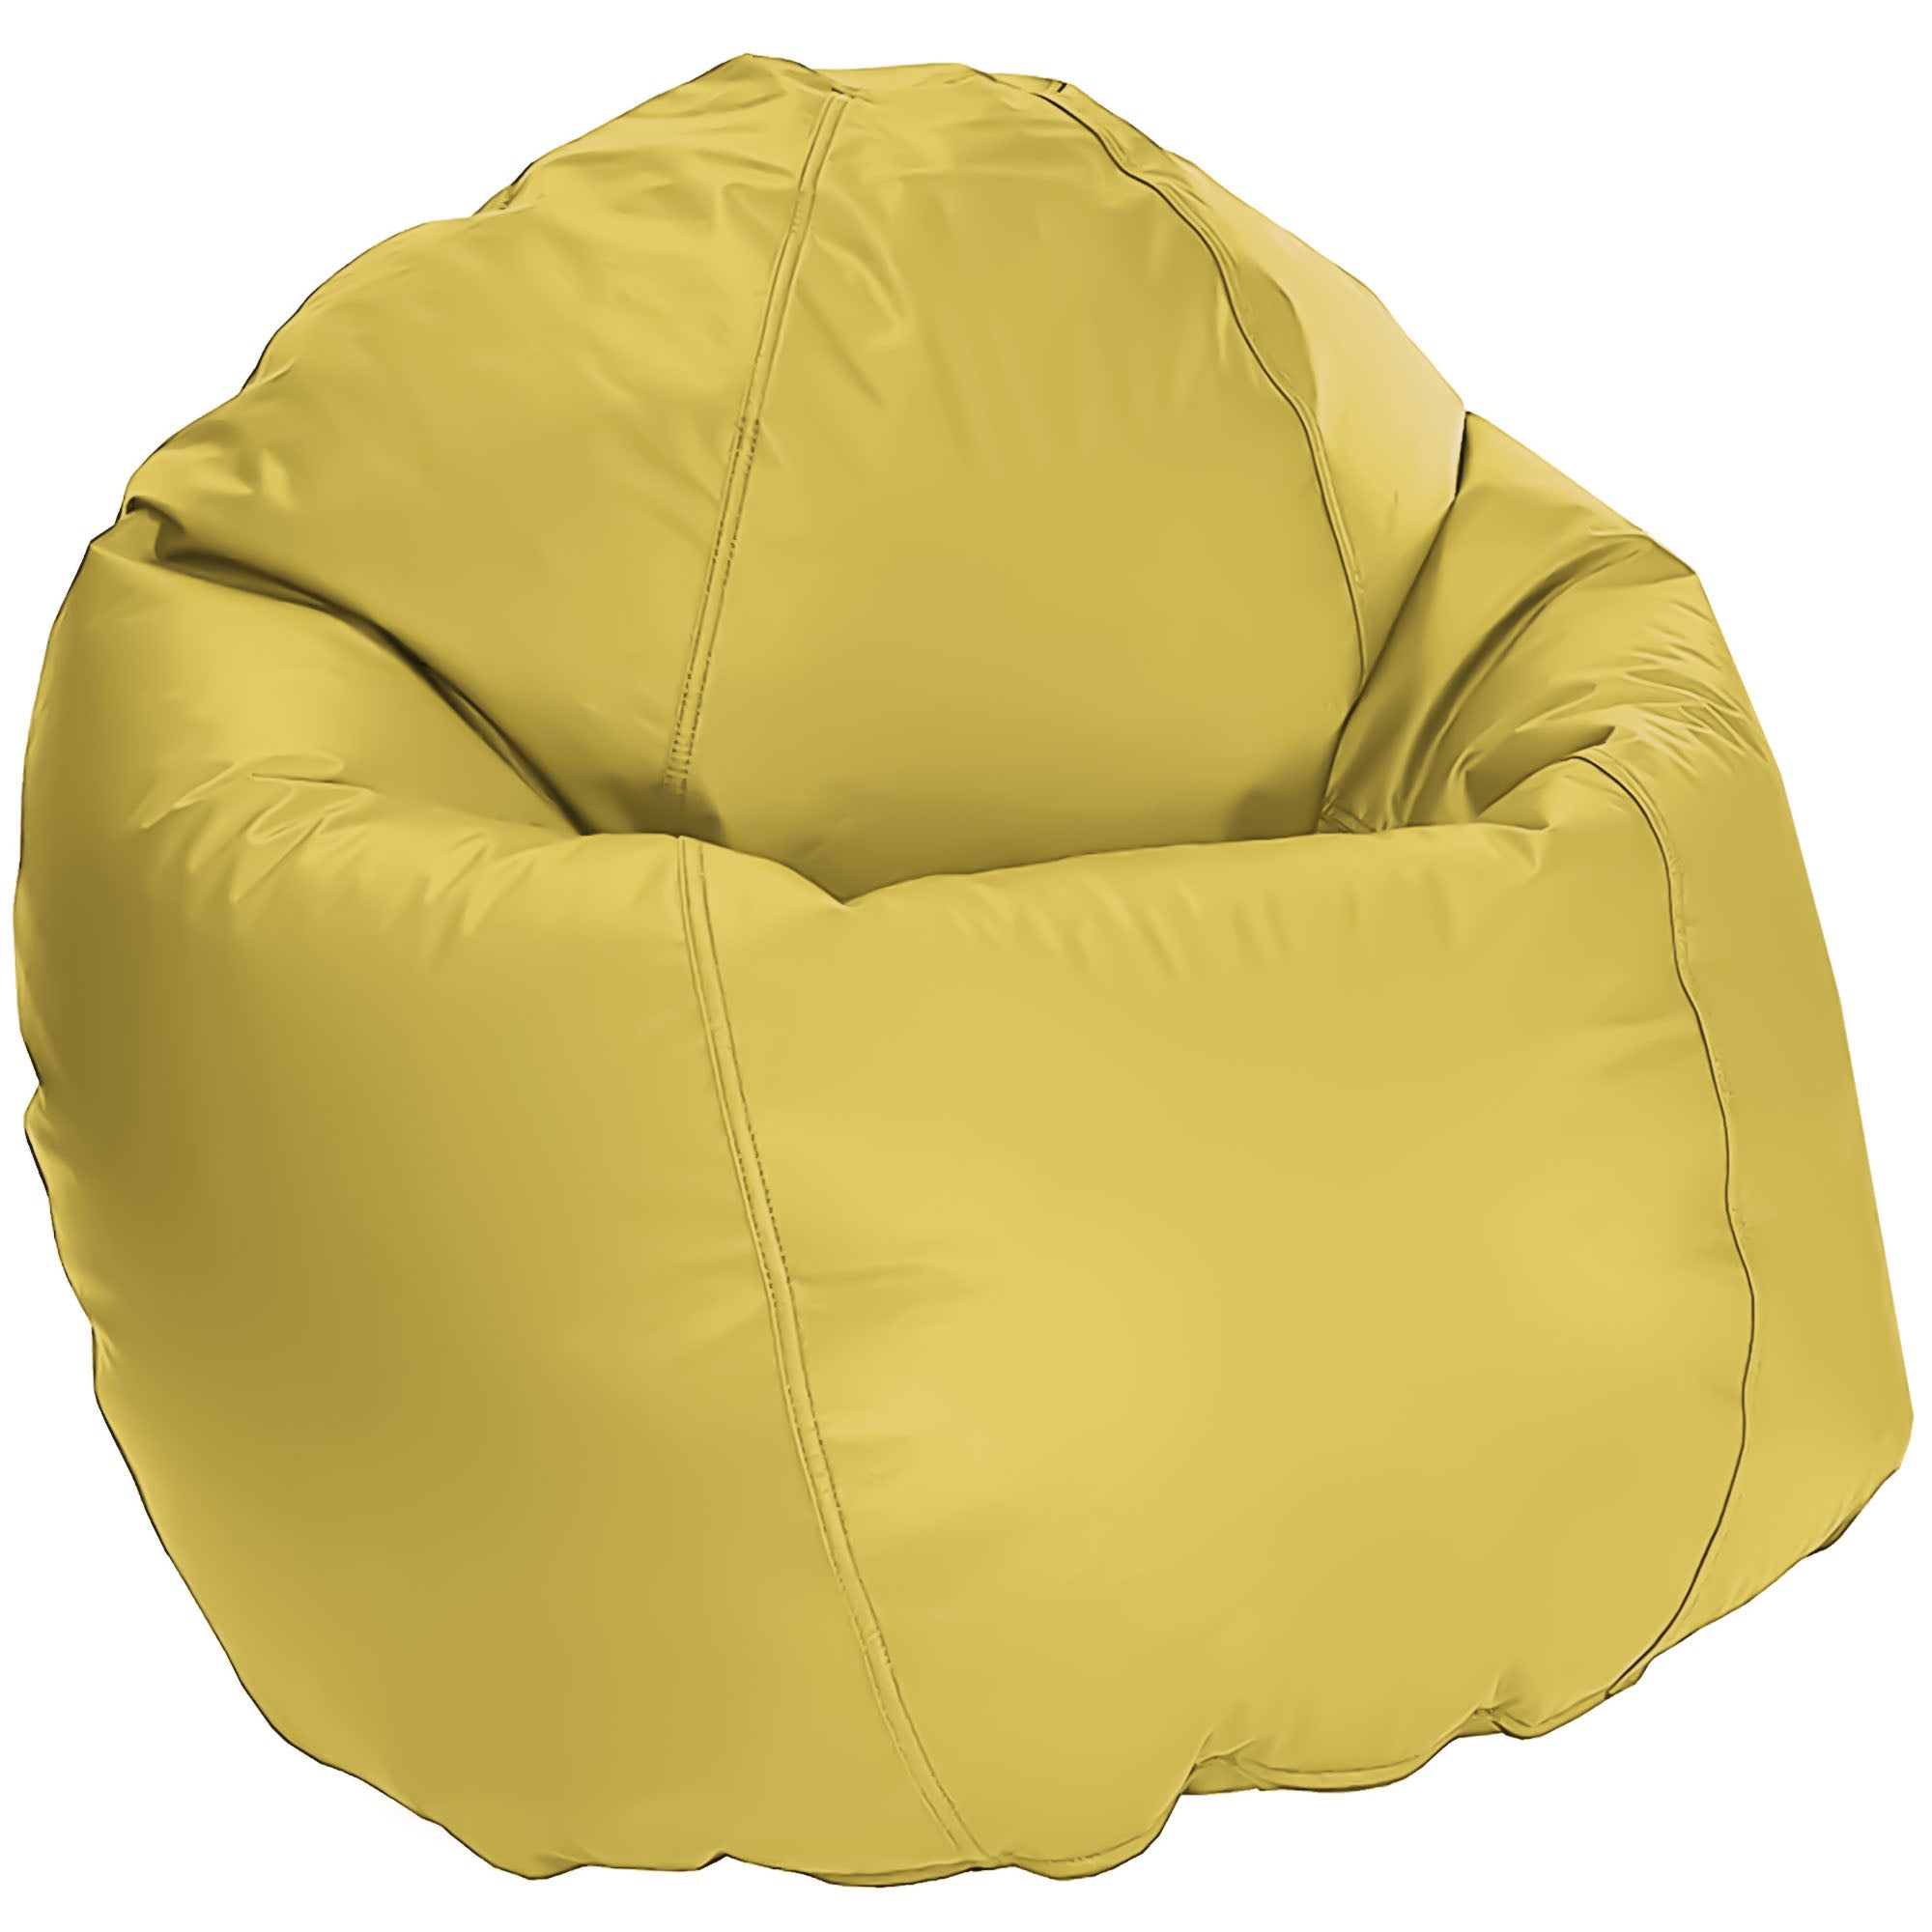 Comfort Research The Dot Bean Bag in Buttercup | NFM